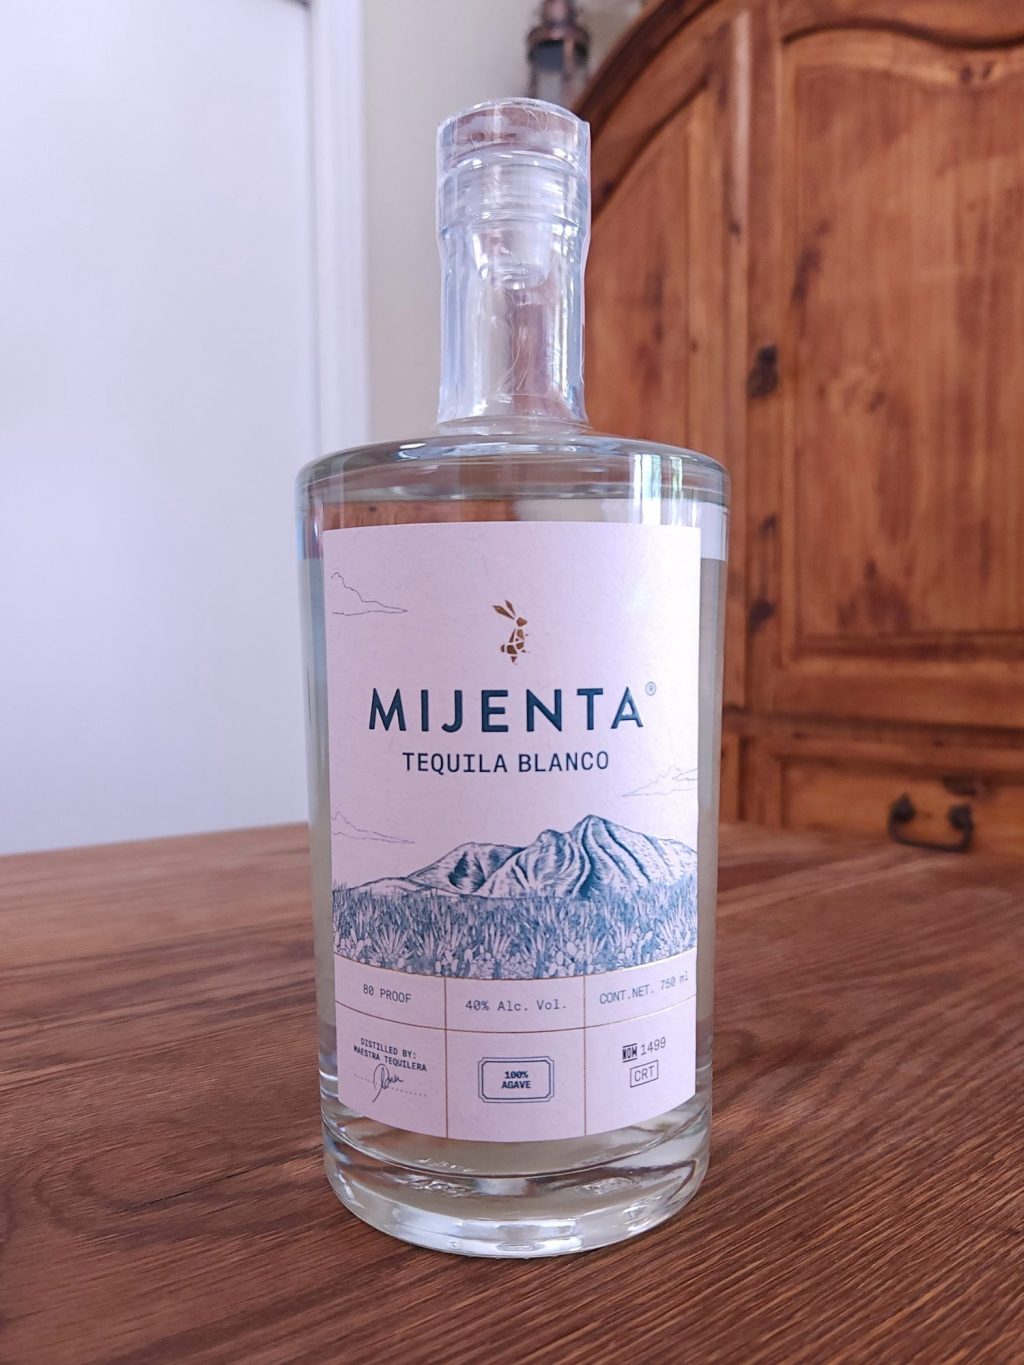 Bottle of Mijenta Blanco Tequila sitting on a wooden table, in front of a mixed white and wooden background.